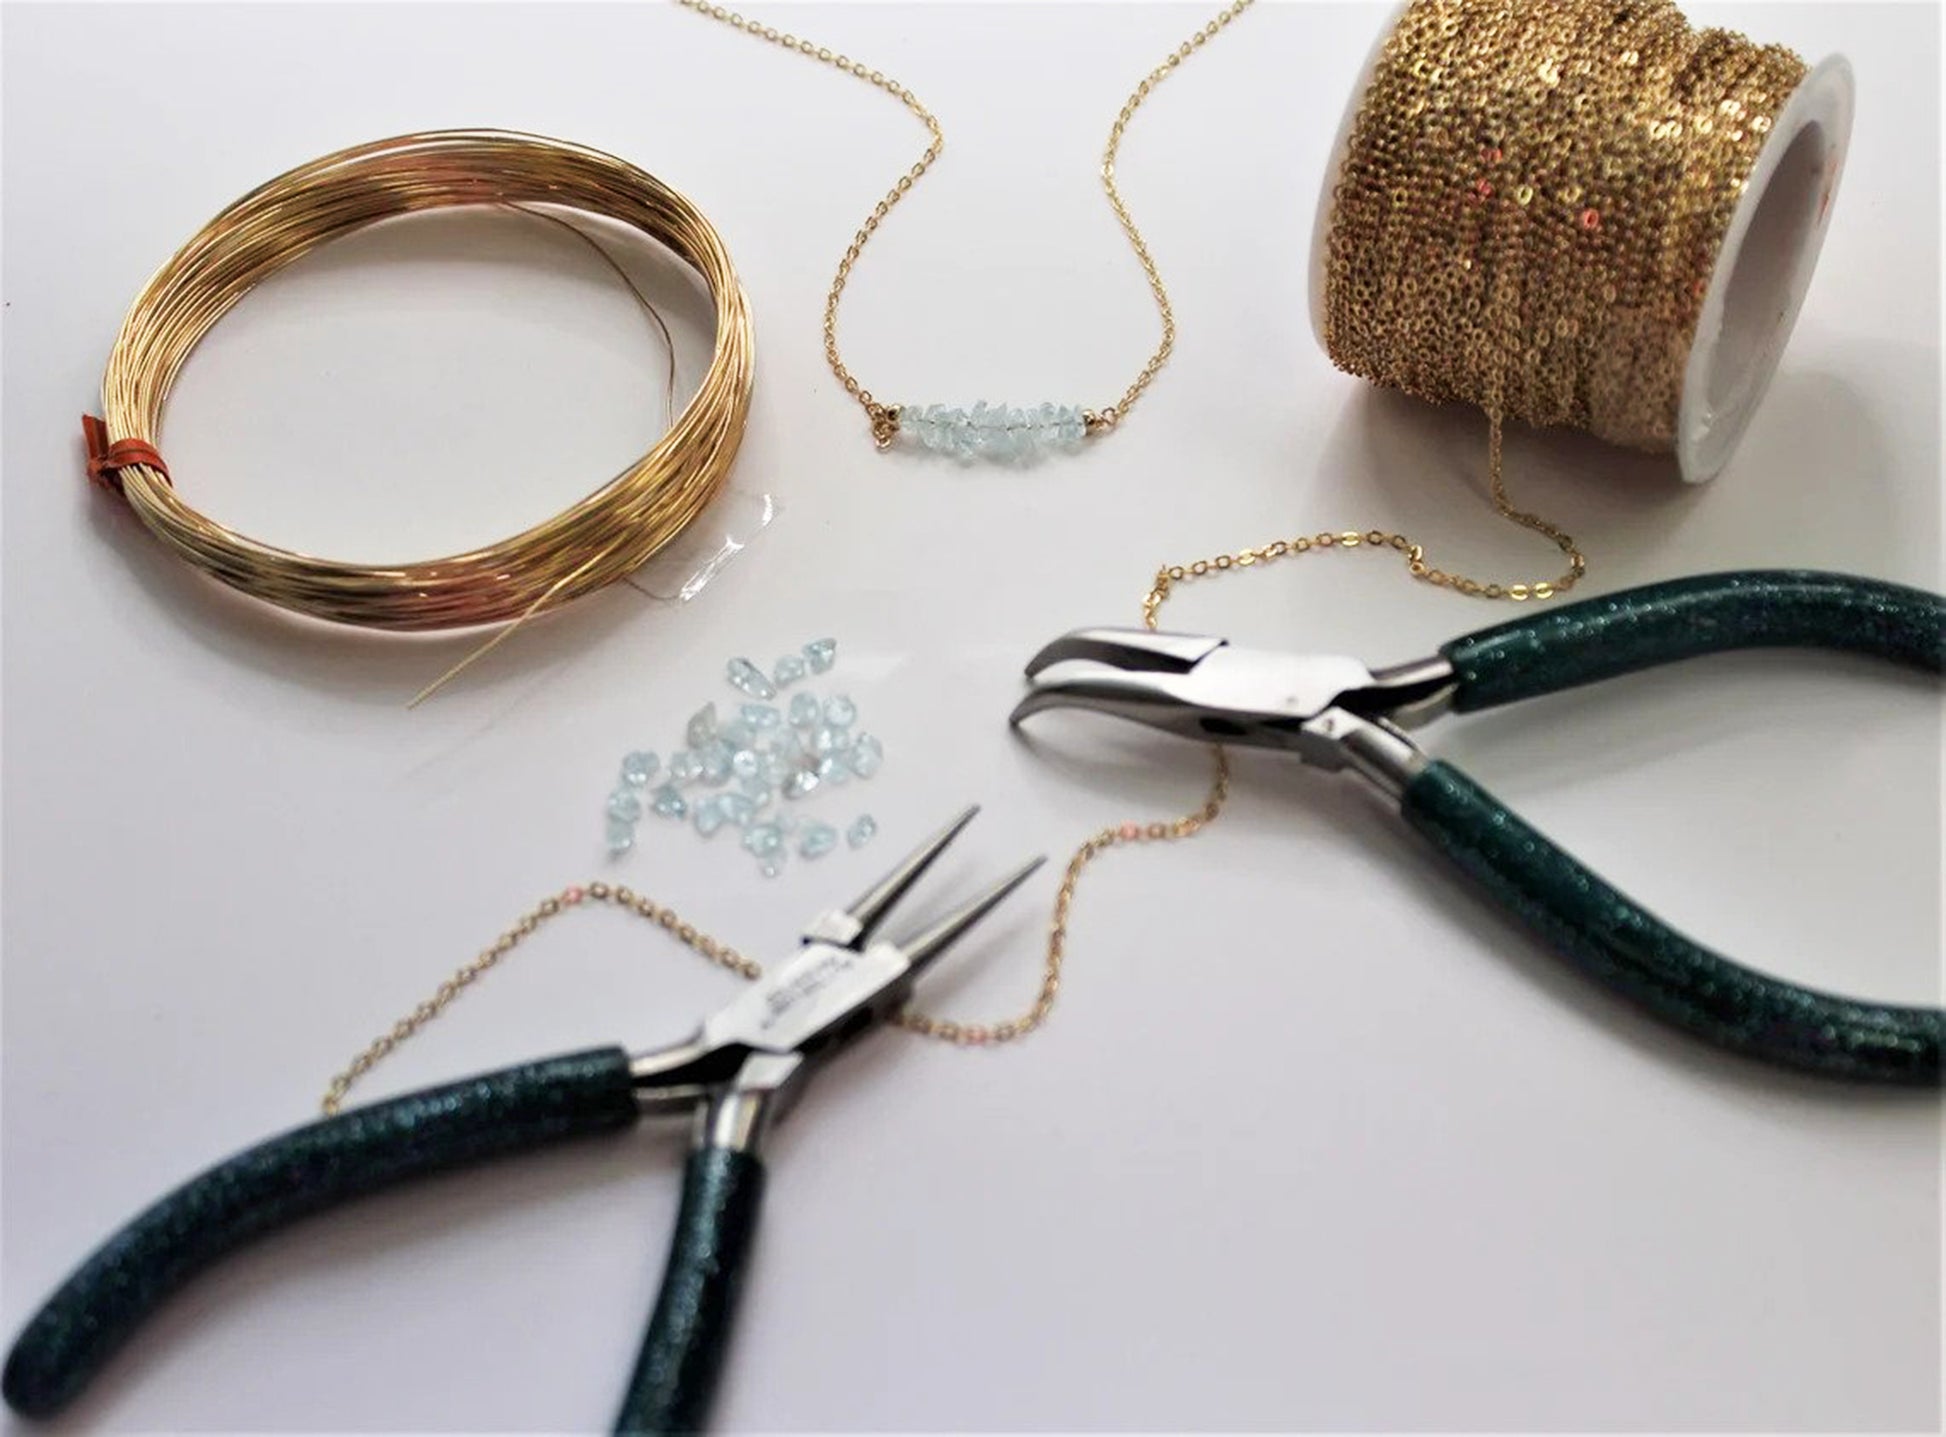 Custom jewelers tools and supplies including gold filled necklace chain, wire wrapping, natural gemstone pieces, jewelers pliers, and a partially complete gemstone necklace lay on a flat white surface.